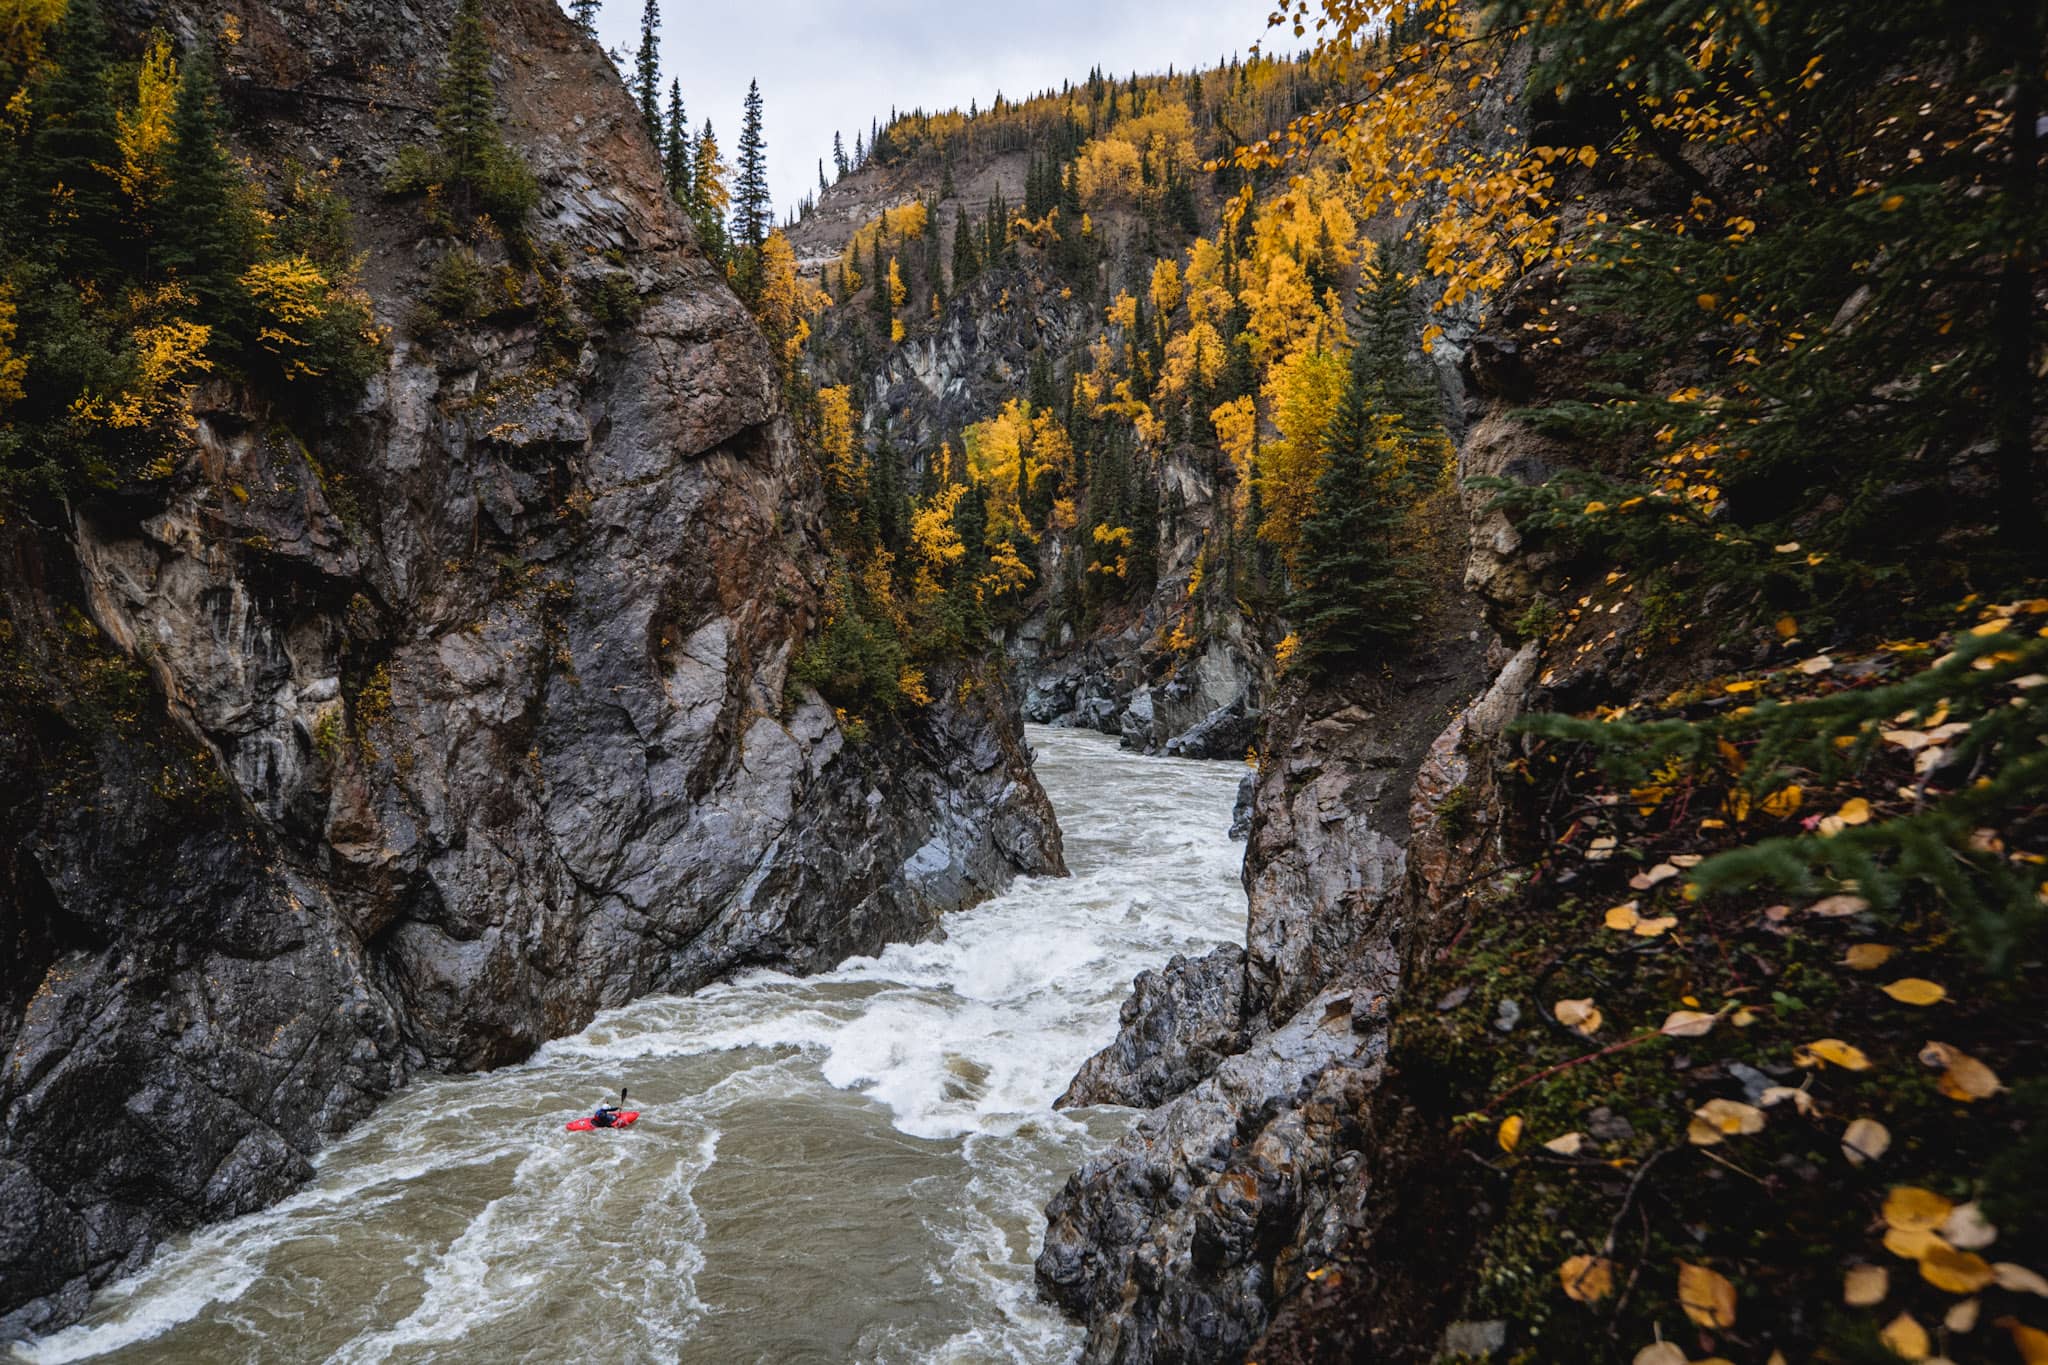 benny marr entering a rapid in the stikine river canyon british columbia